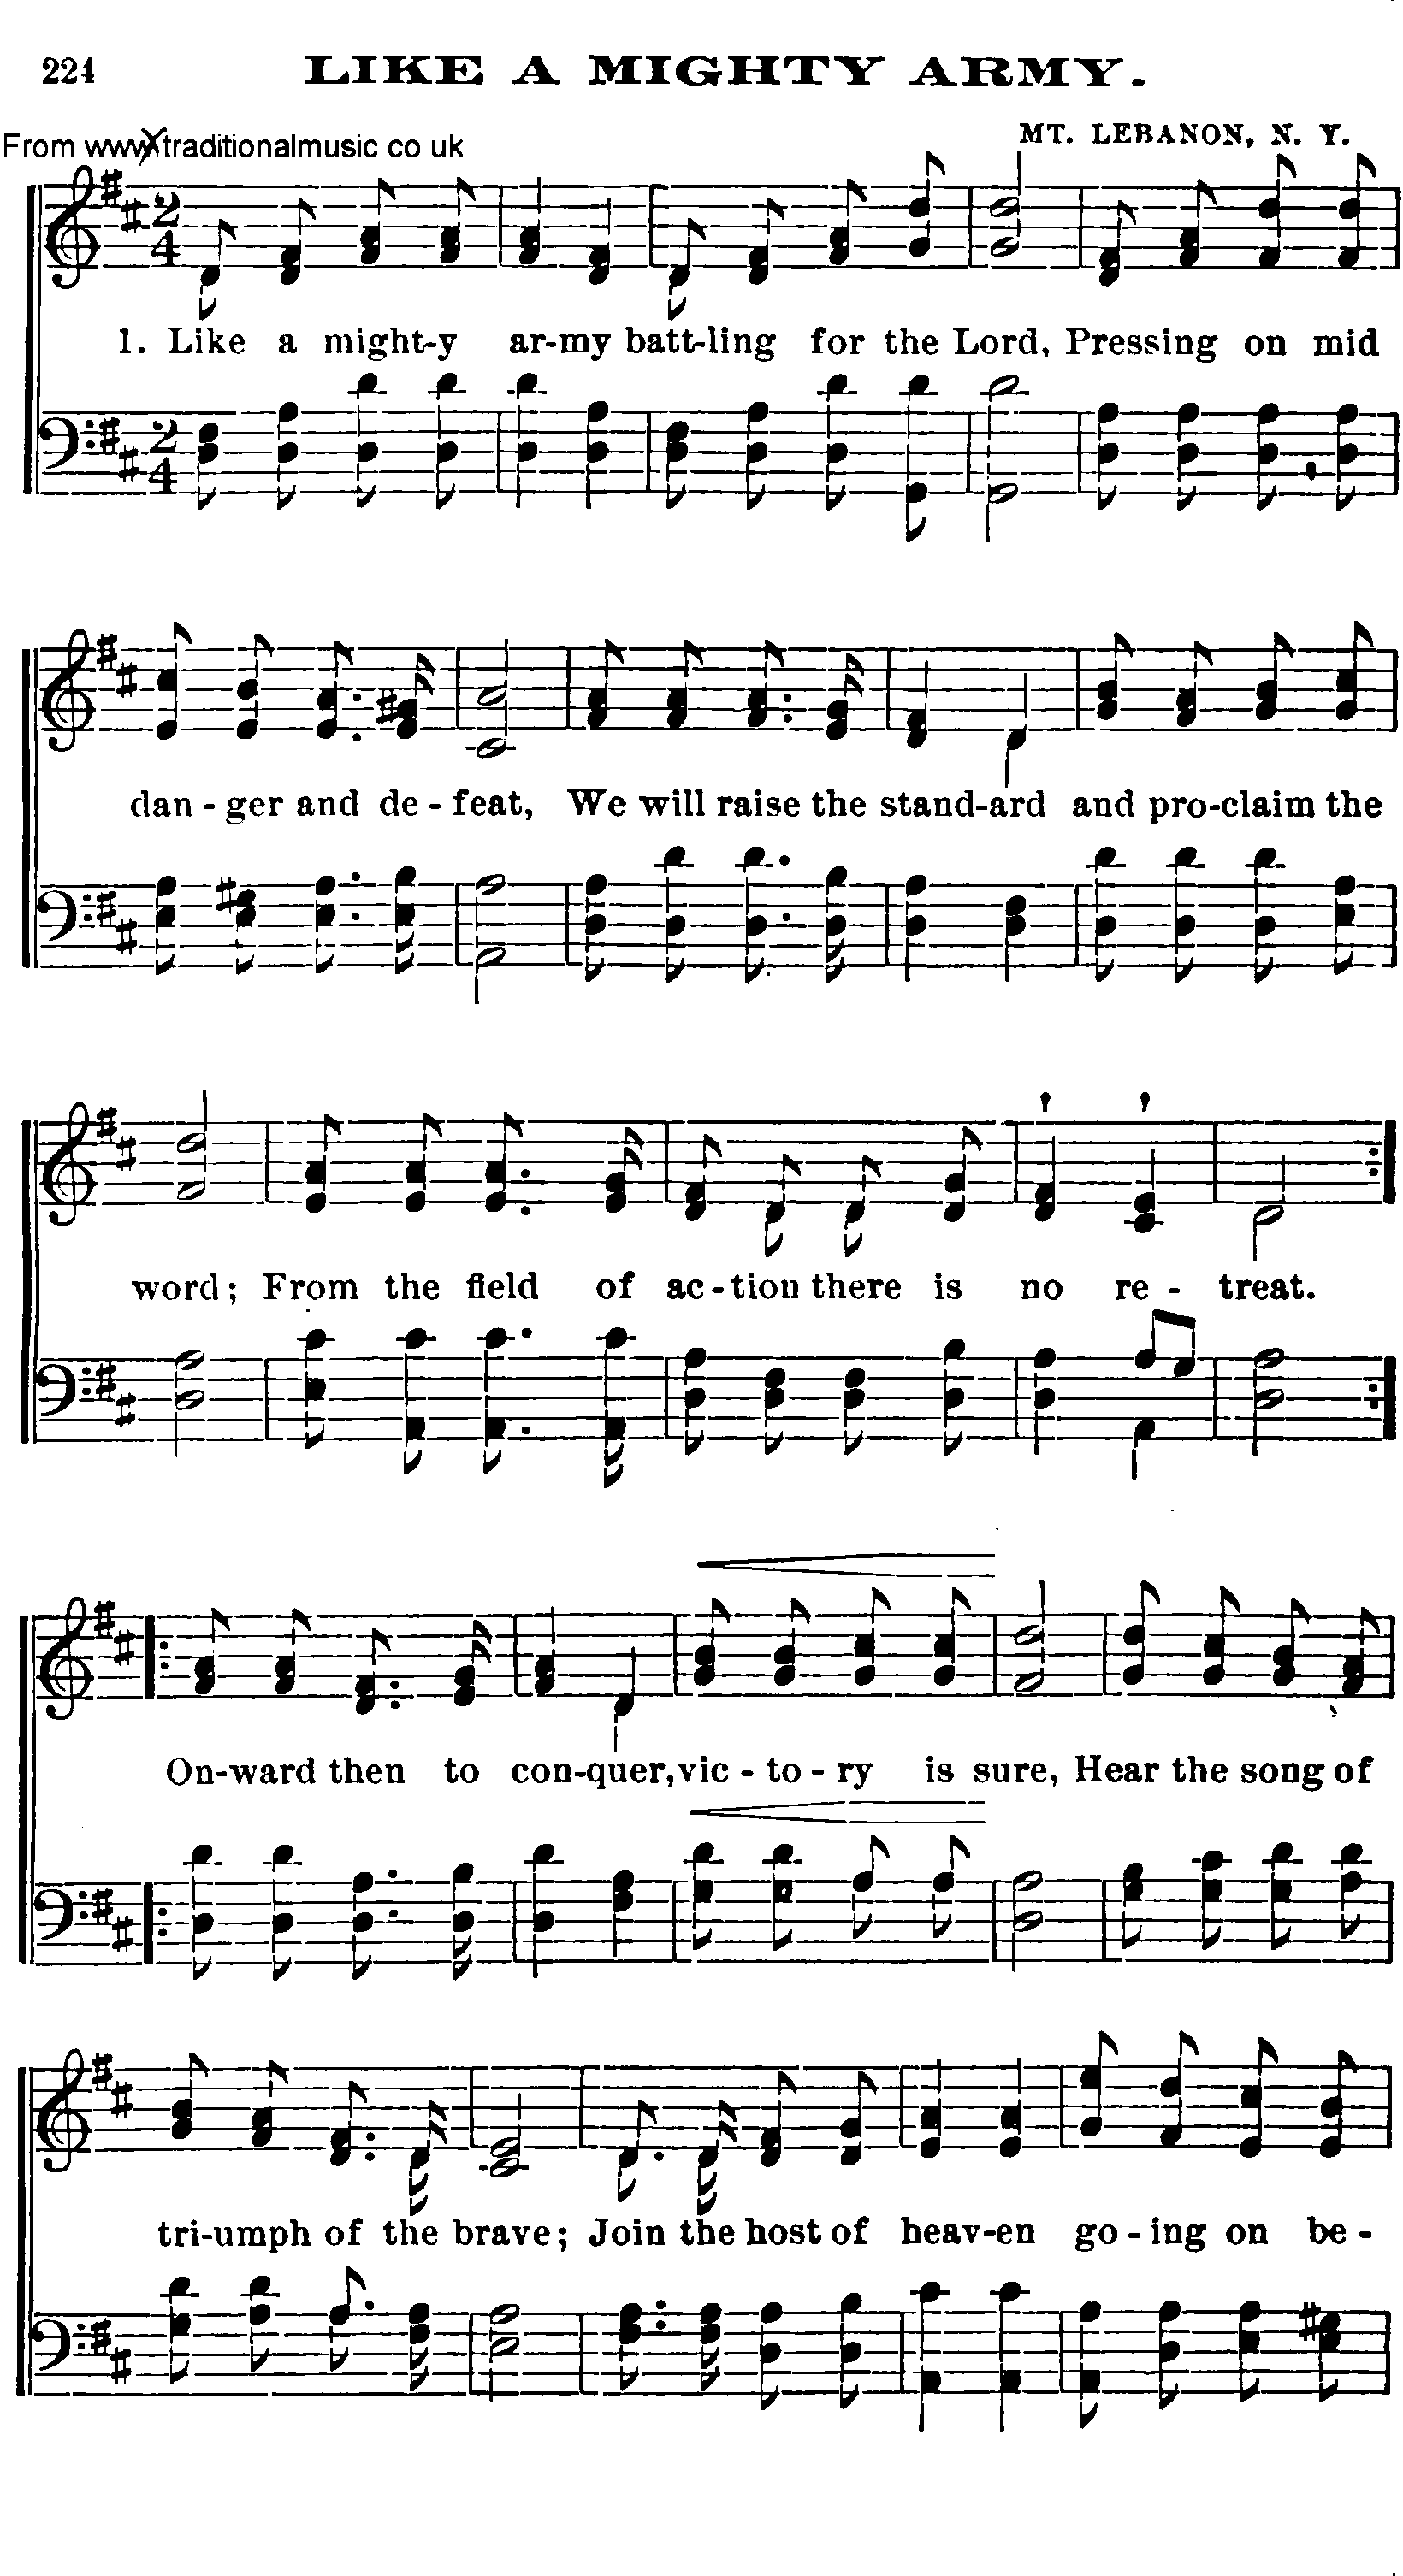 Shaker Music collection, Hymn: like a might army, sheetmusic and PDF